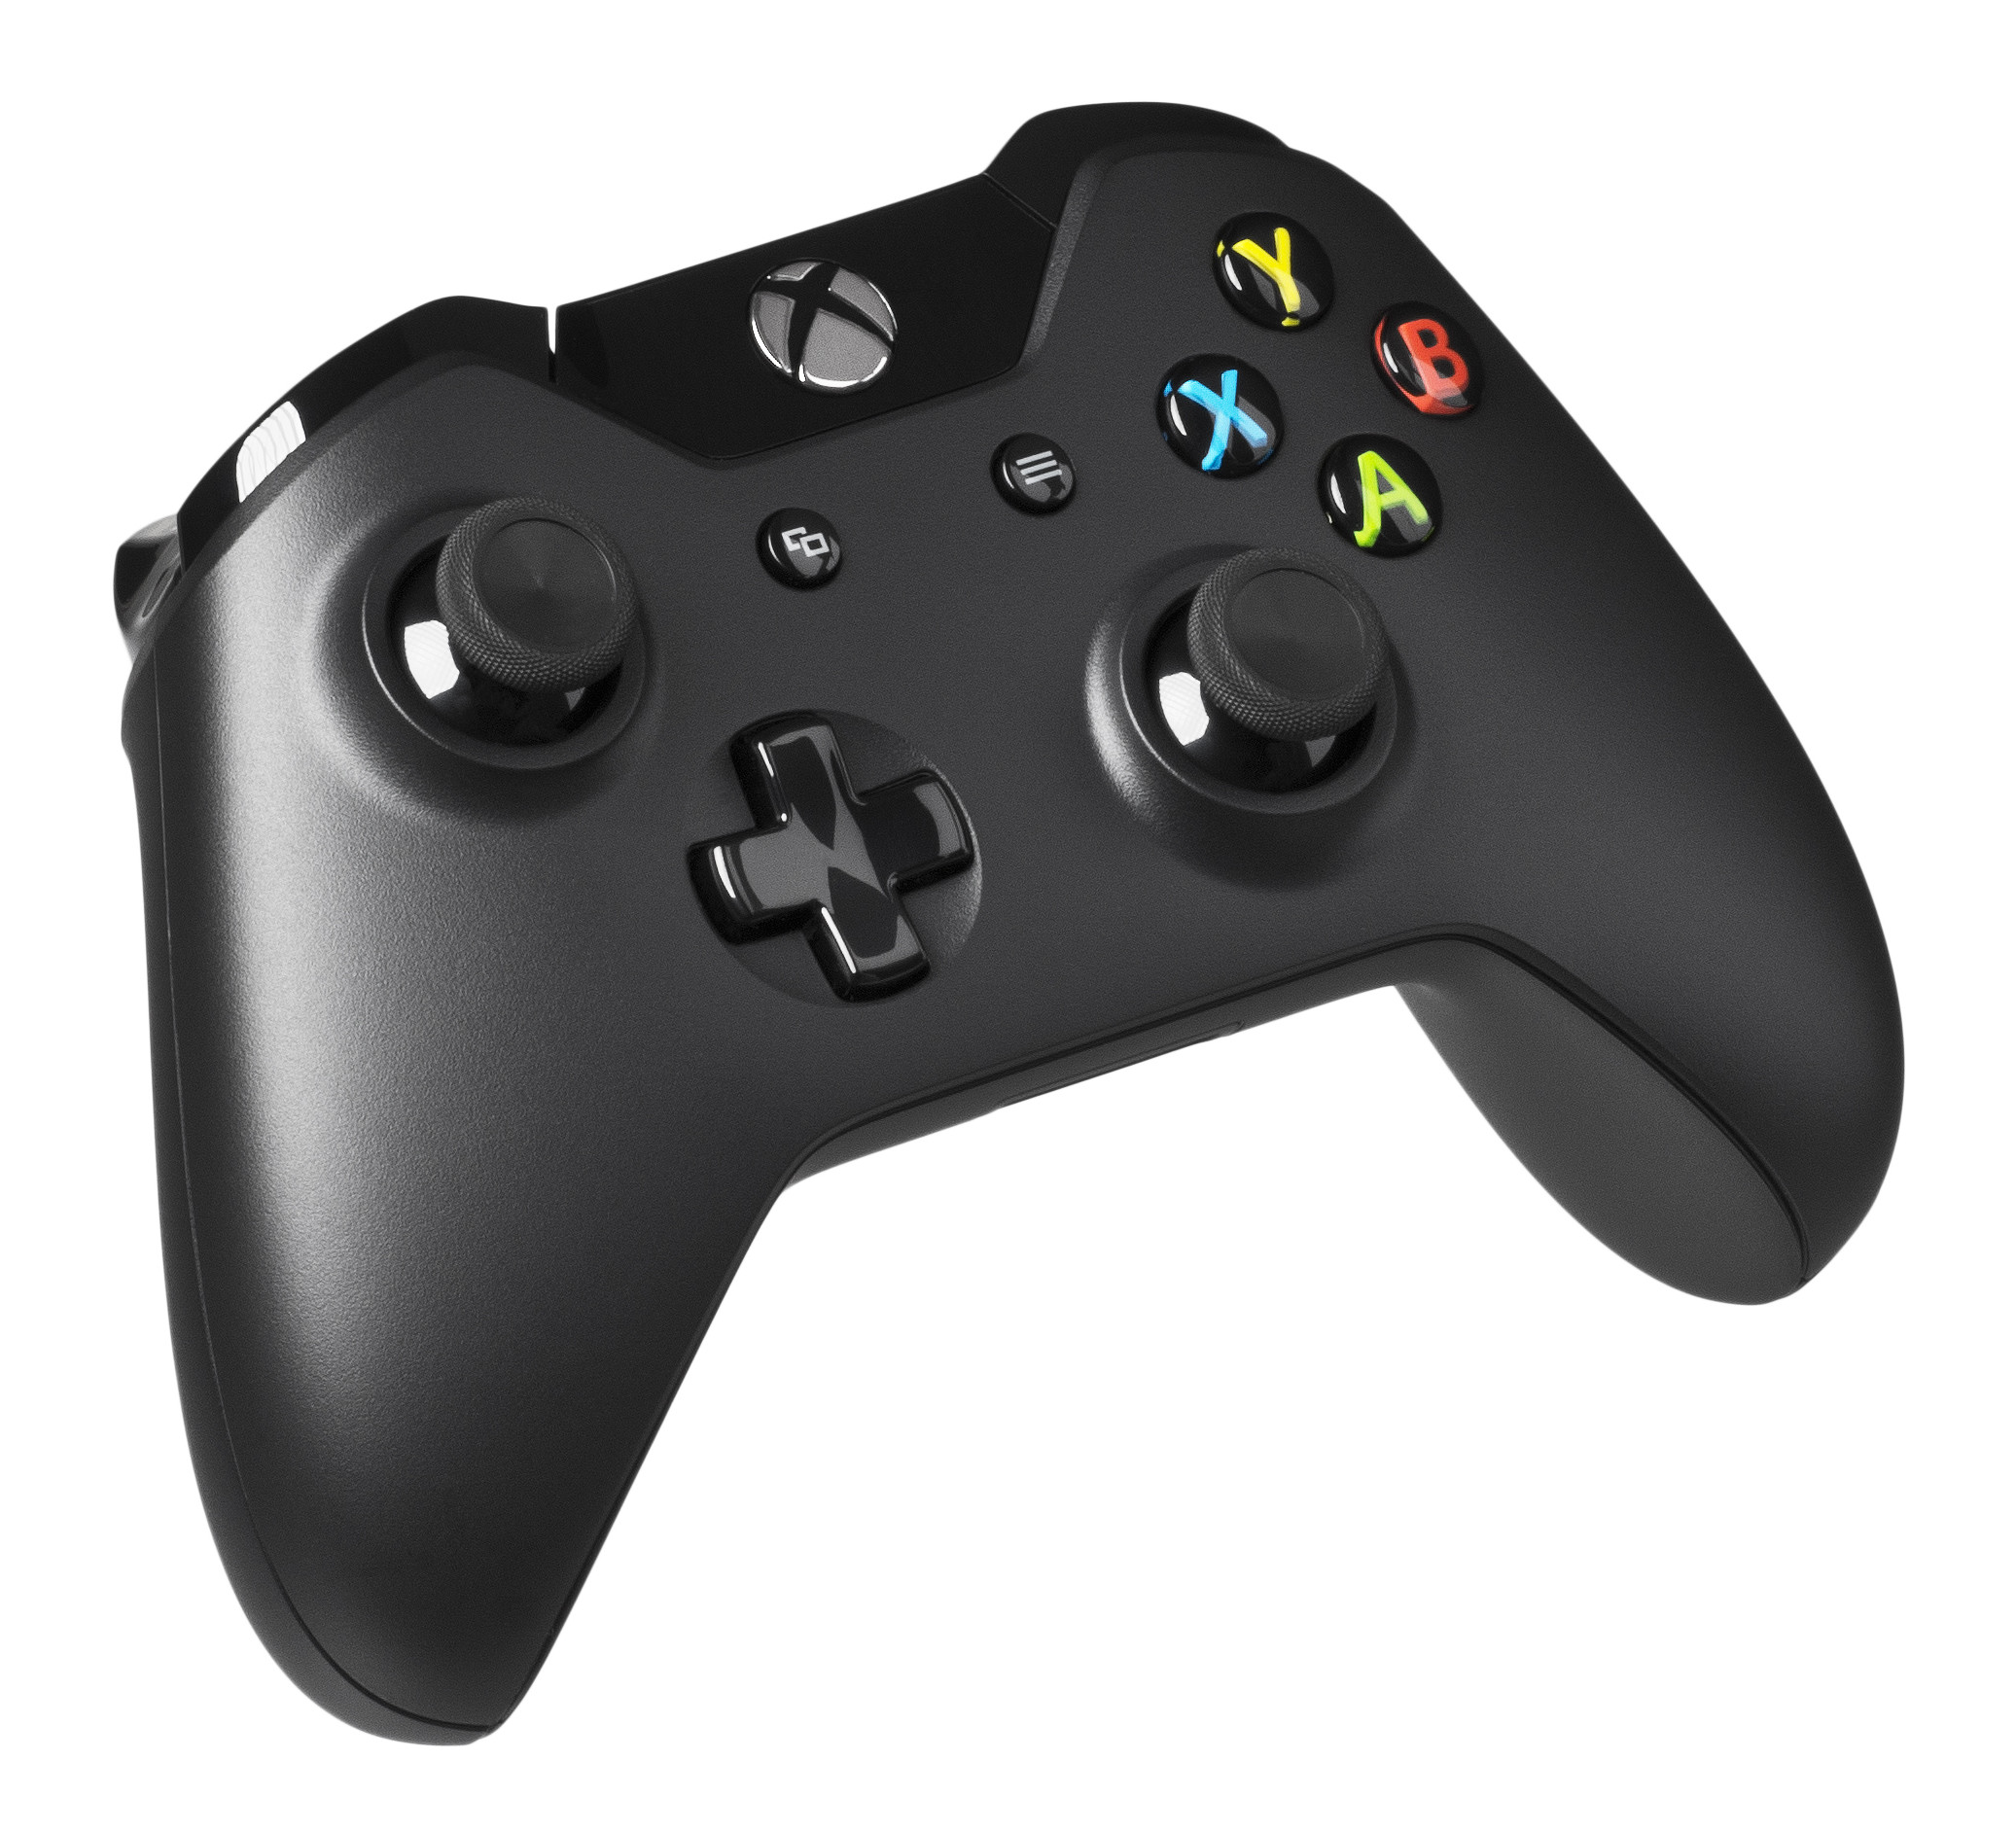 Xbox One controller and console in close proximity